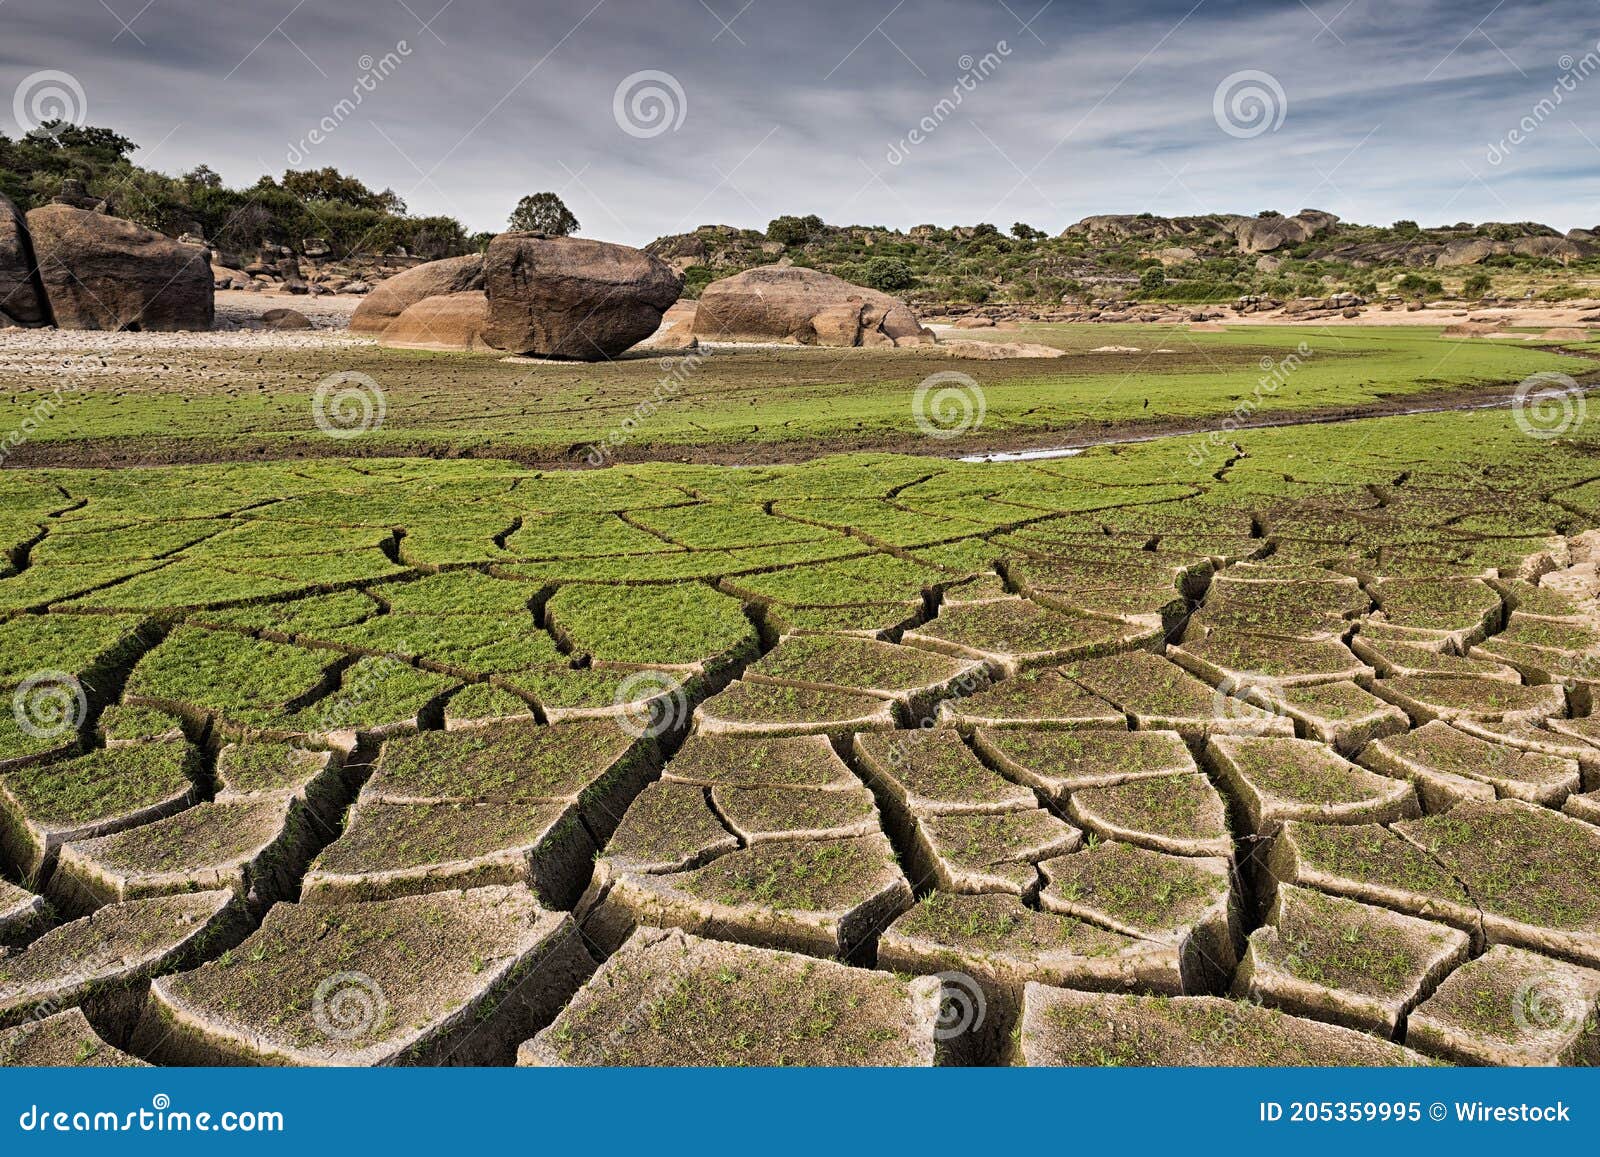 closeup shot of the cracked ground covered with moss in the natural area of marruecos, spain